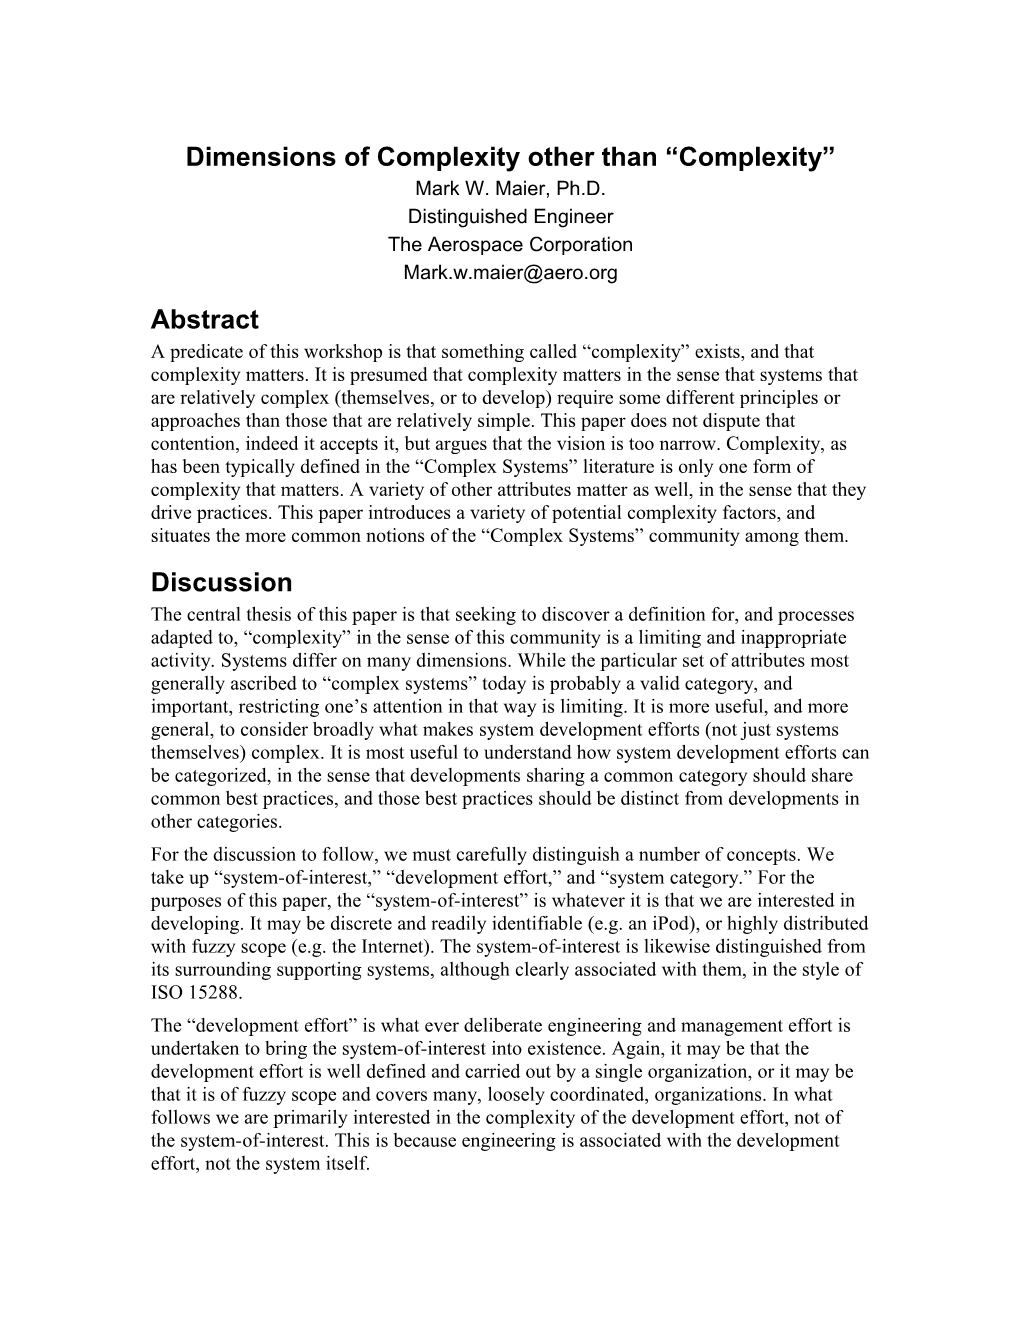 Dimensions of Complexity Other Than Complexity